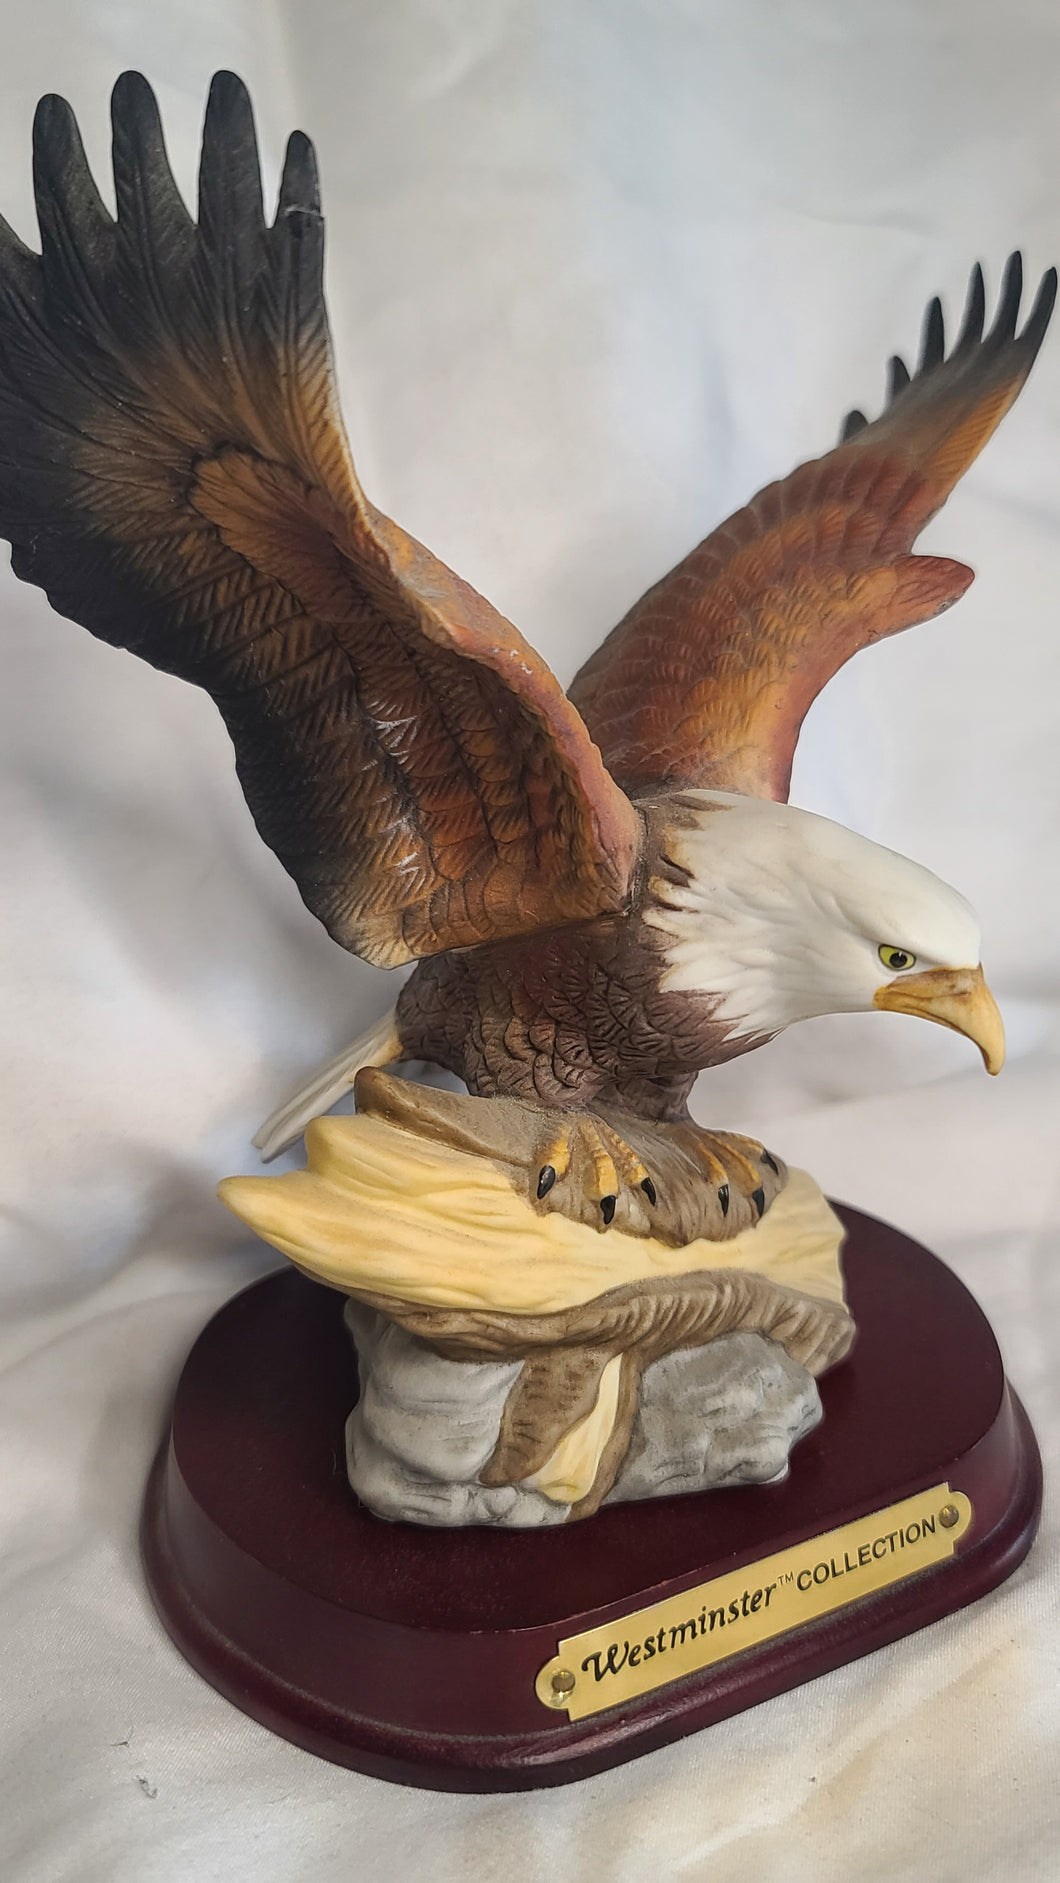 Westminster Collection Porcelain Eagle Figurine 7in